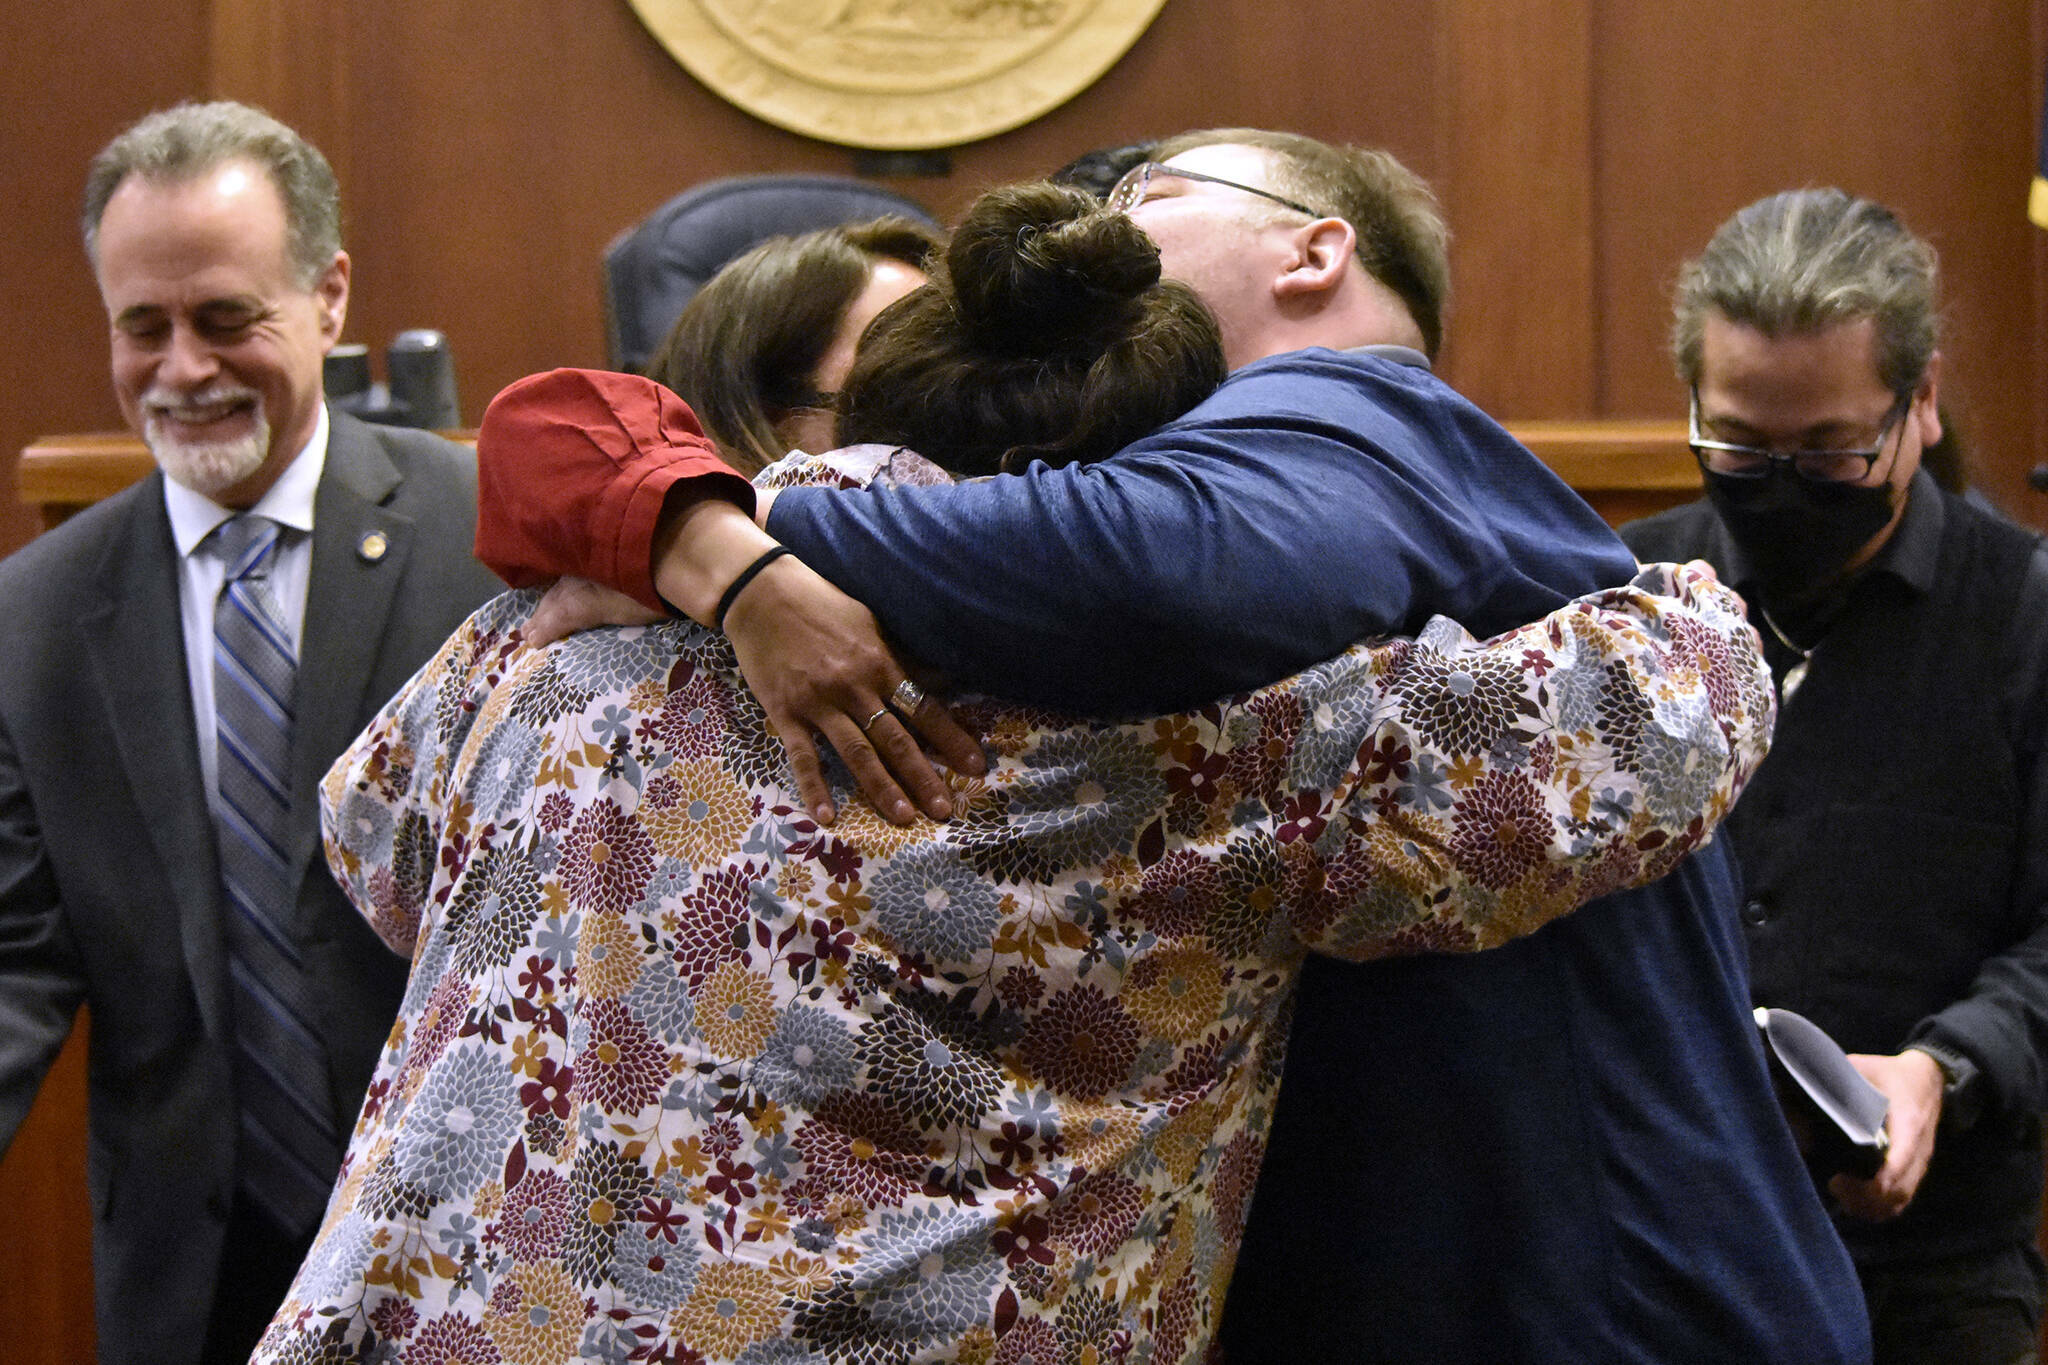 Alaskans for Better Government members La quen náay Liz Medicine Crow, Richard Chalyee Éesh Peterson and ‘Wáahlaal Gidáak Barbara Blake embrace on the floor of the Alaska State Senate on Friday, May 13, 2022, following the passage of House Bill 123, a bill to formally recognize the state’s 229 already federally-recognized tribes. Gov. Mike Dunleavy is scheduled to sign the bill during a ceremony Thursday during a ceremony in Anchorage. (Peter Segall / Juneau Empire)